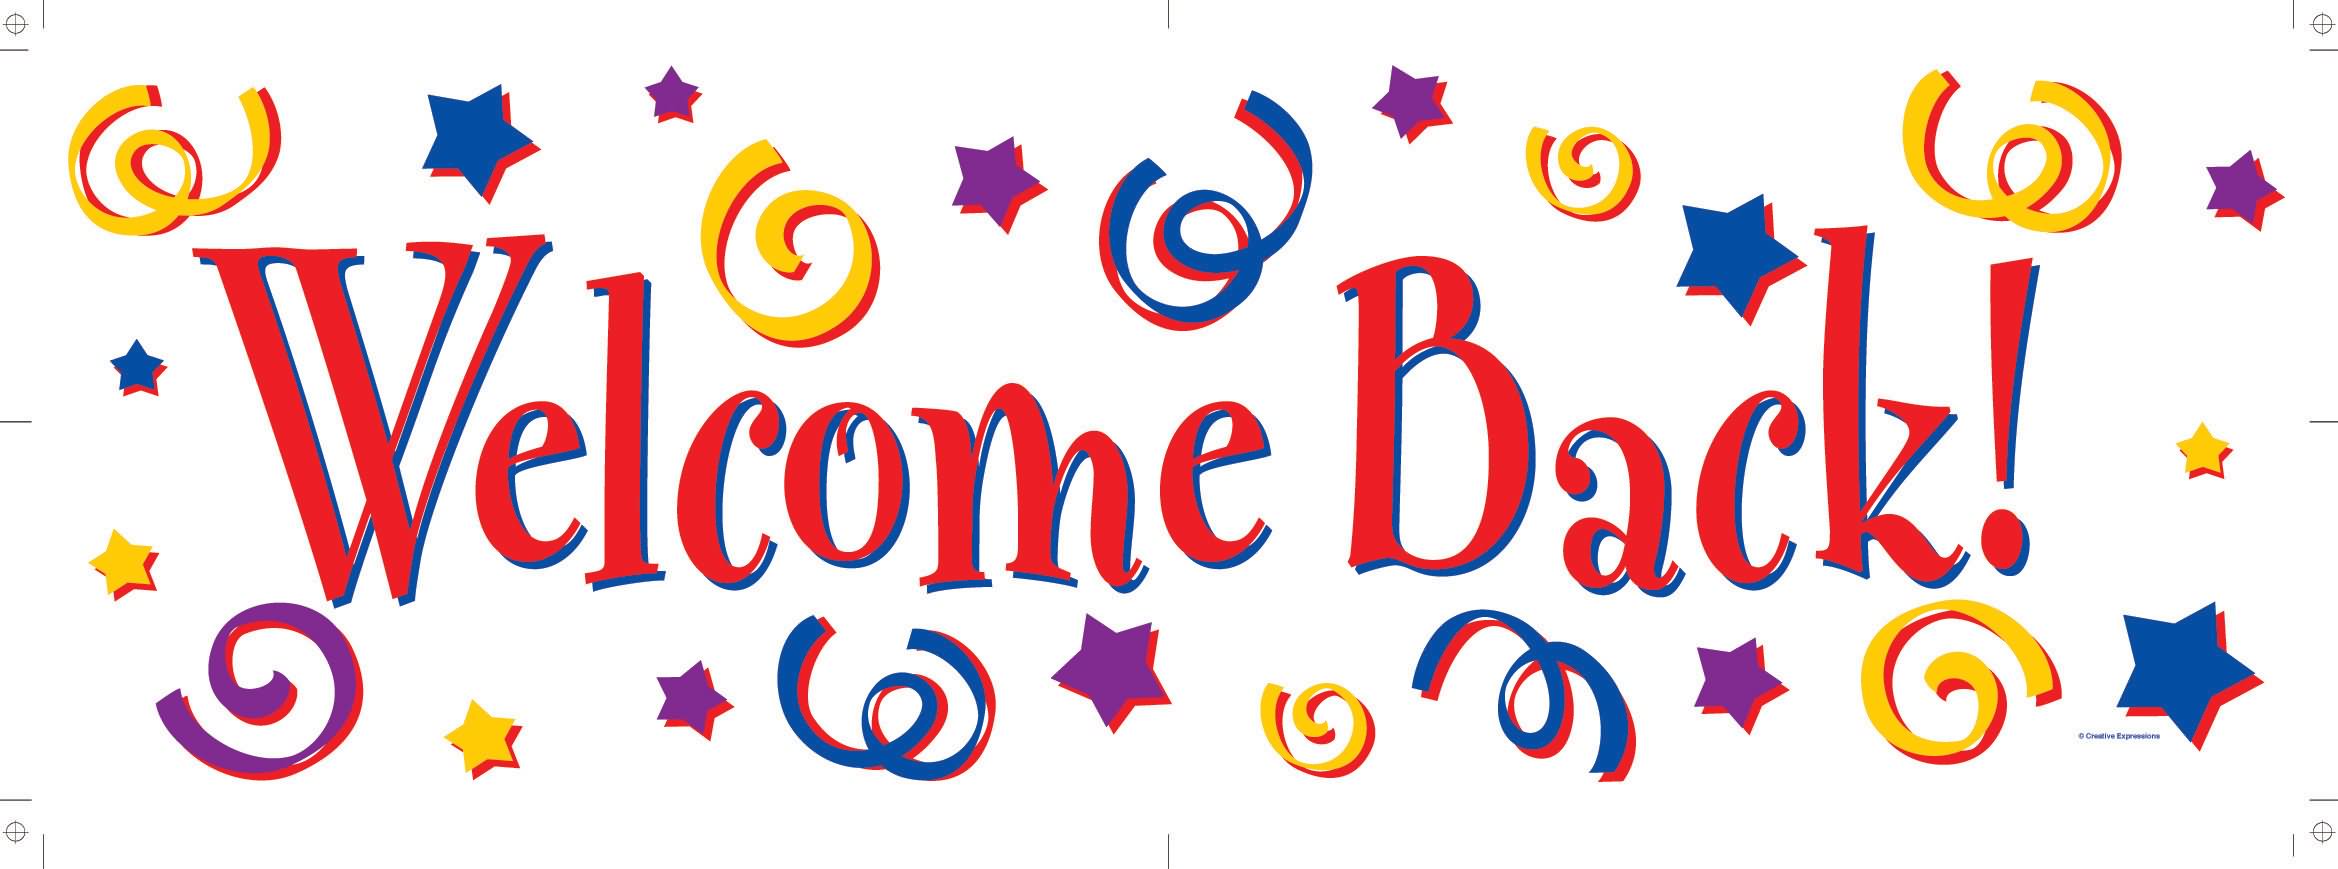 Free welcome clip art images 